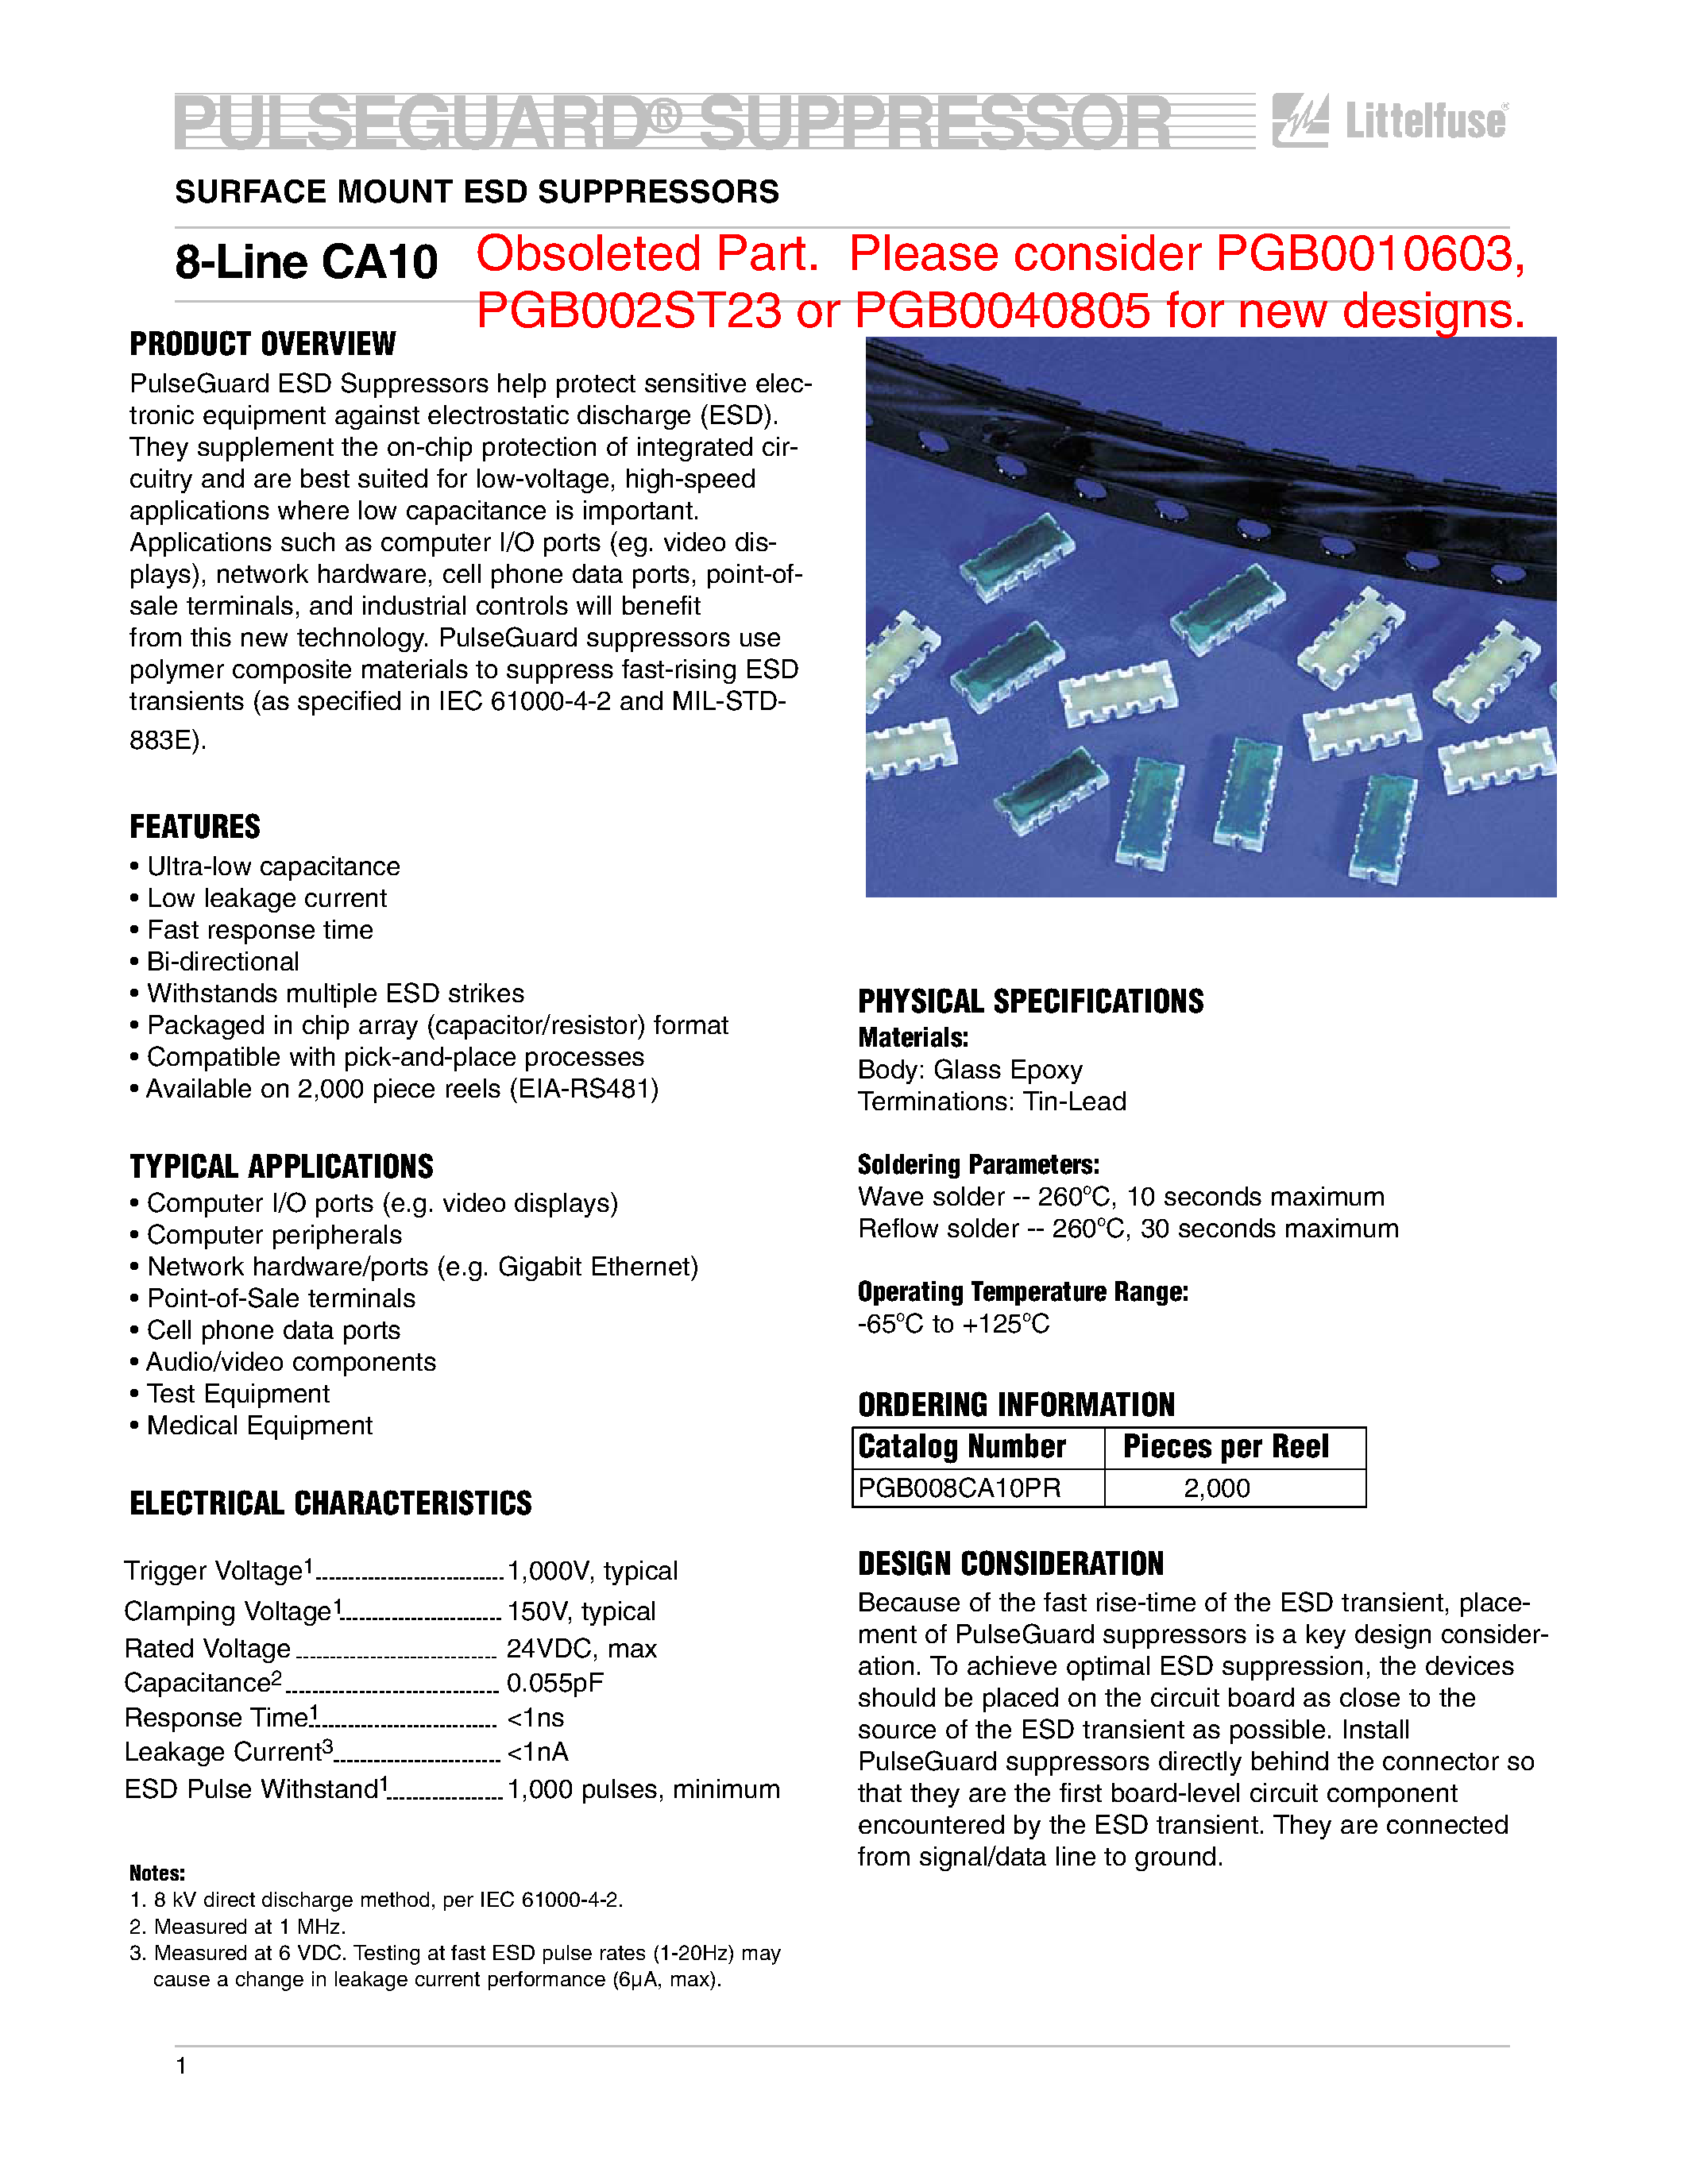 Datasheet CA10 - SURFACE MOUNT ESD SUPPRESSORS/ 8-Line CA10 page 1